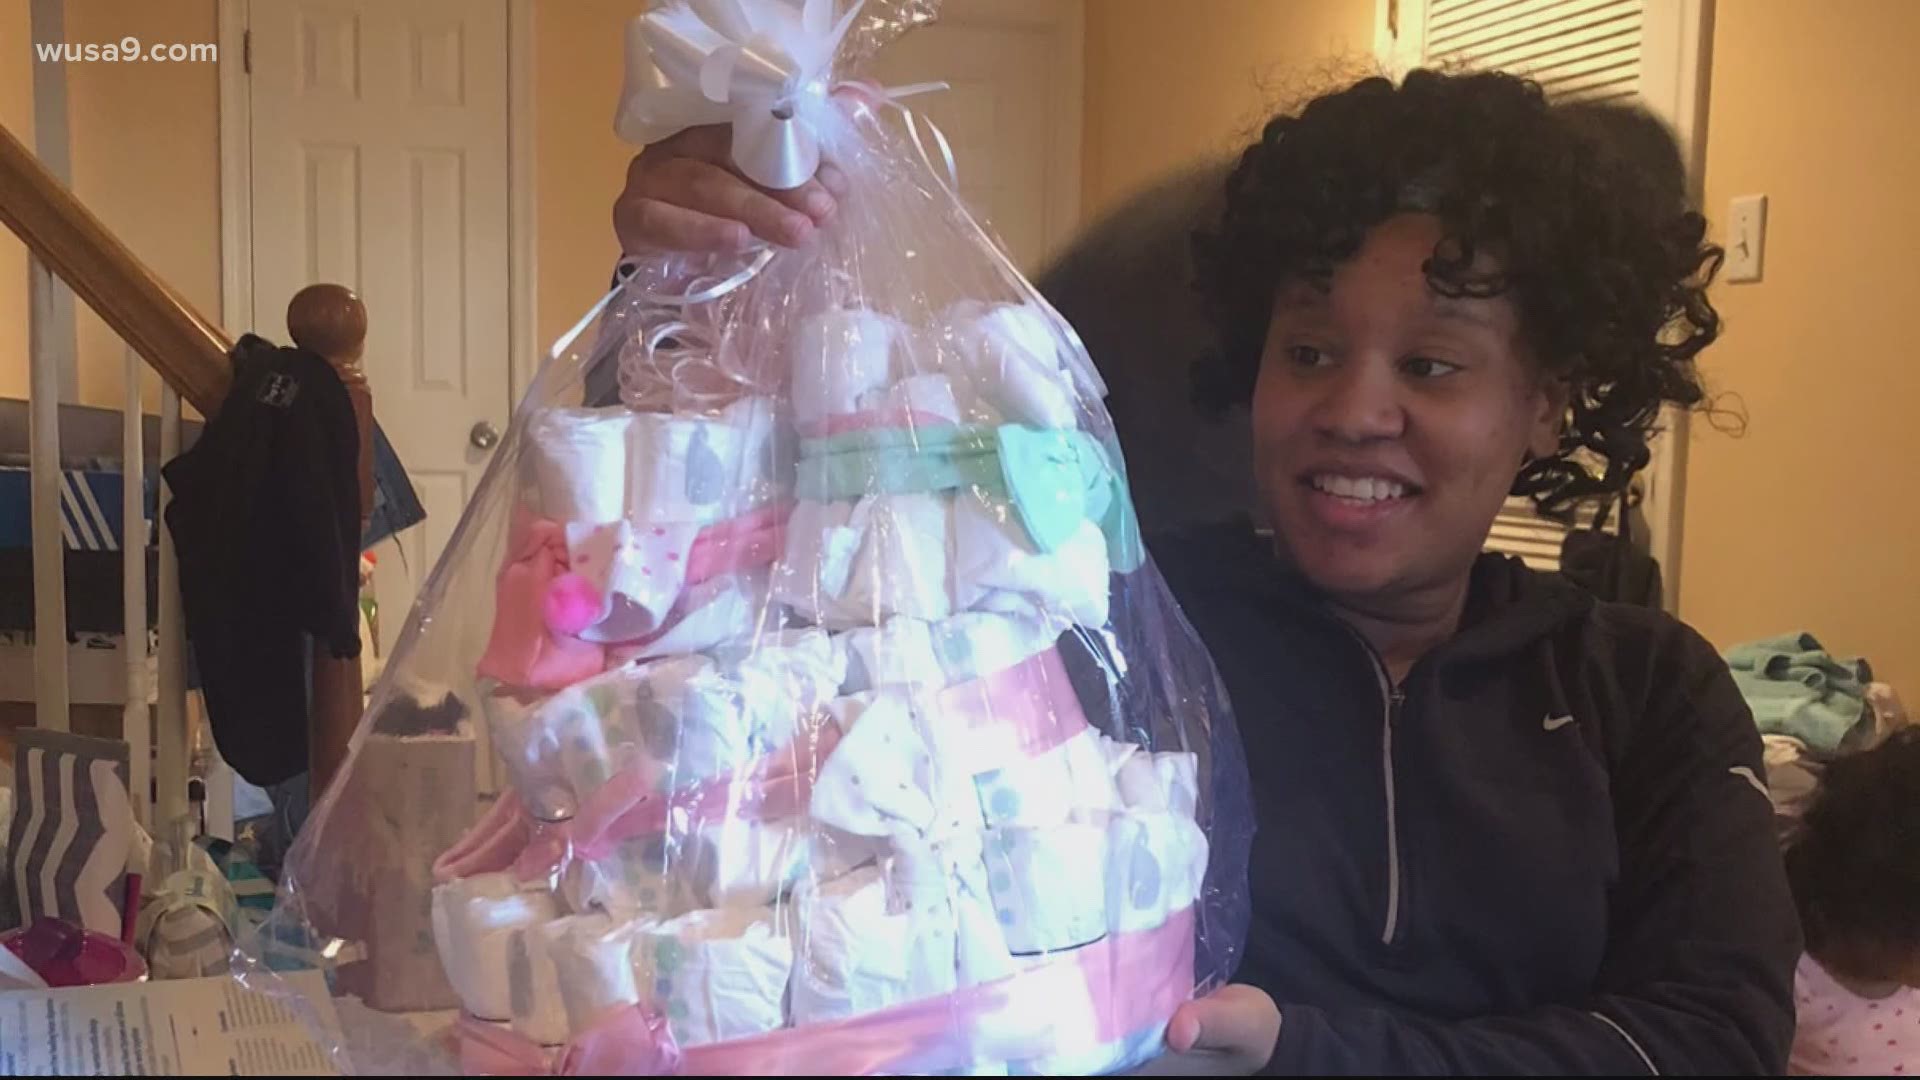 Jenaye Blackmon is two weeks away from delivering her first child. Because of the COVID-19 pandemic, she had to cancel her shower.